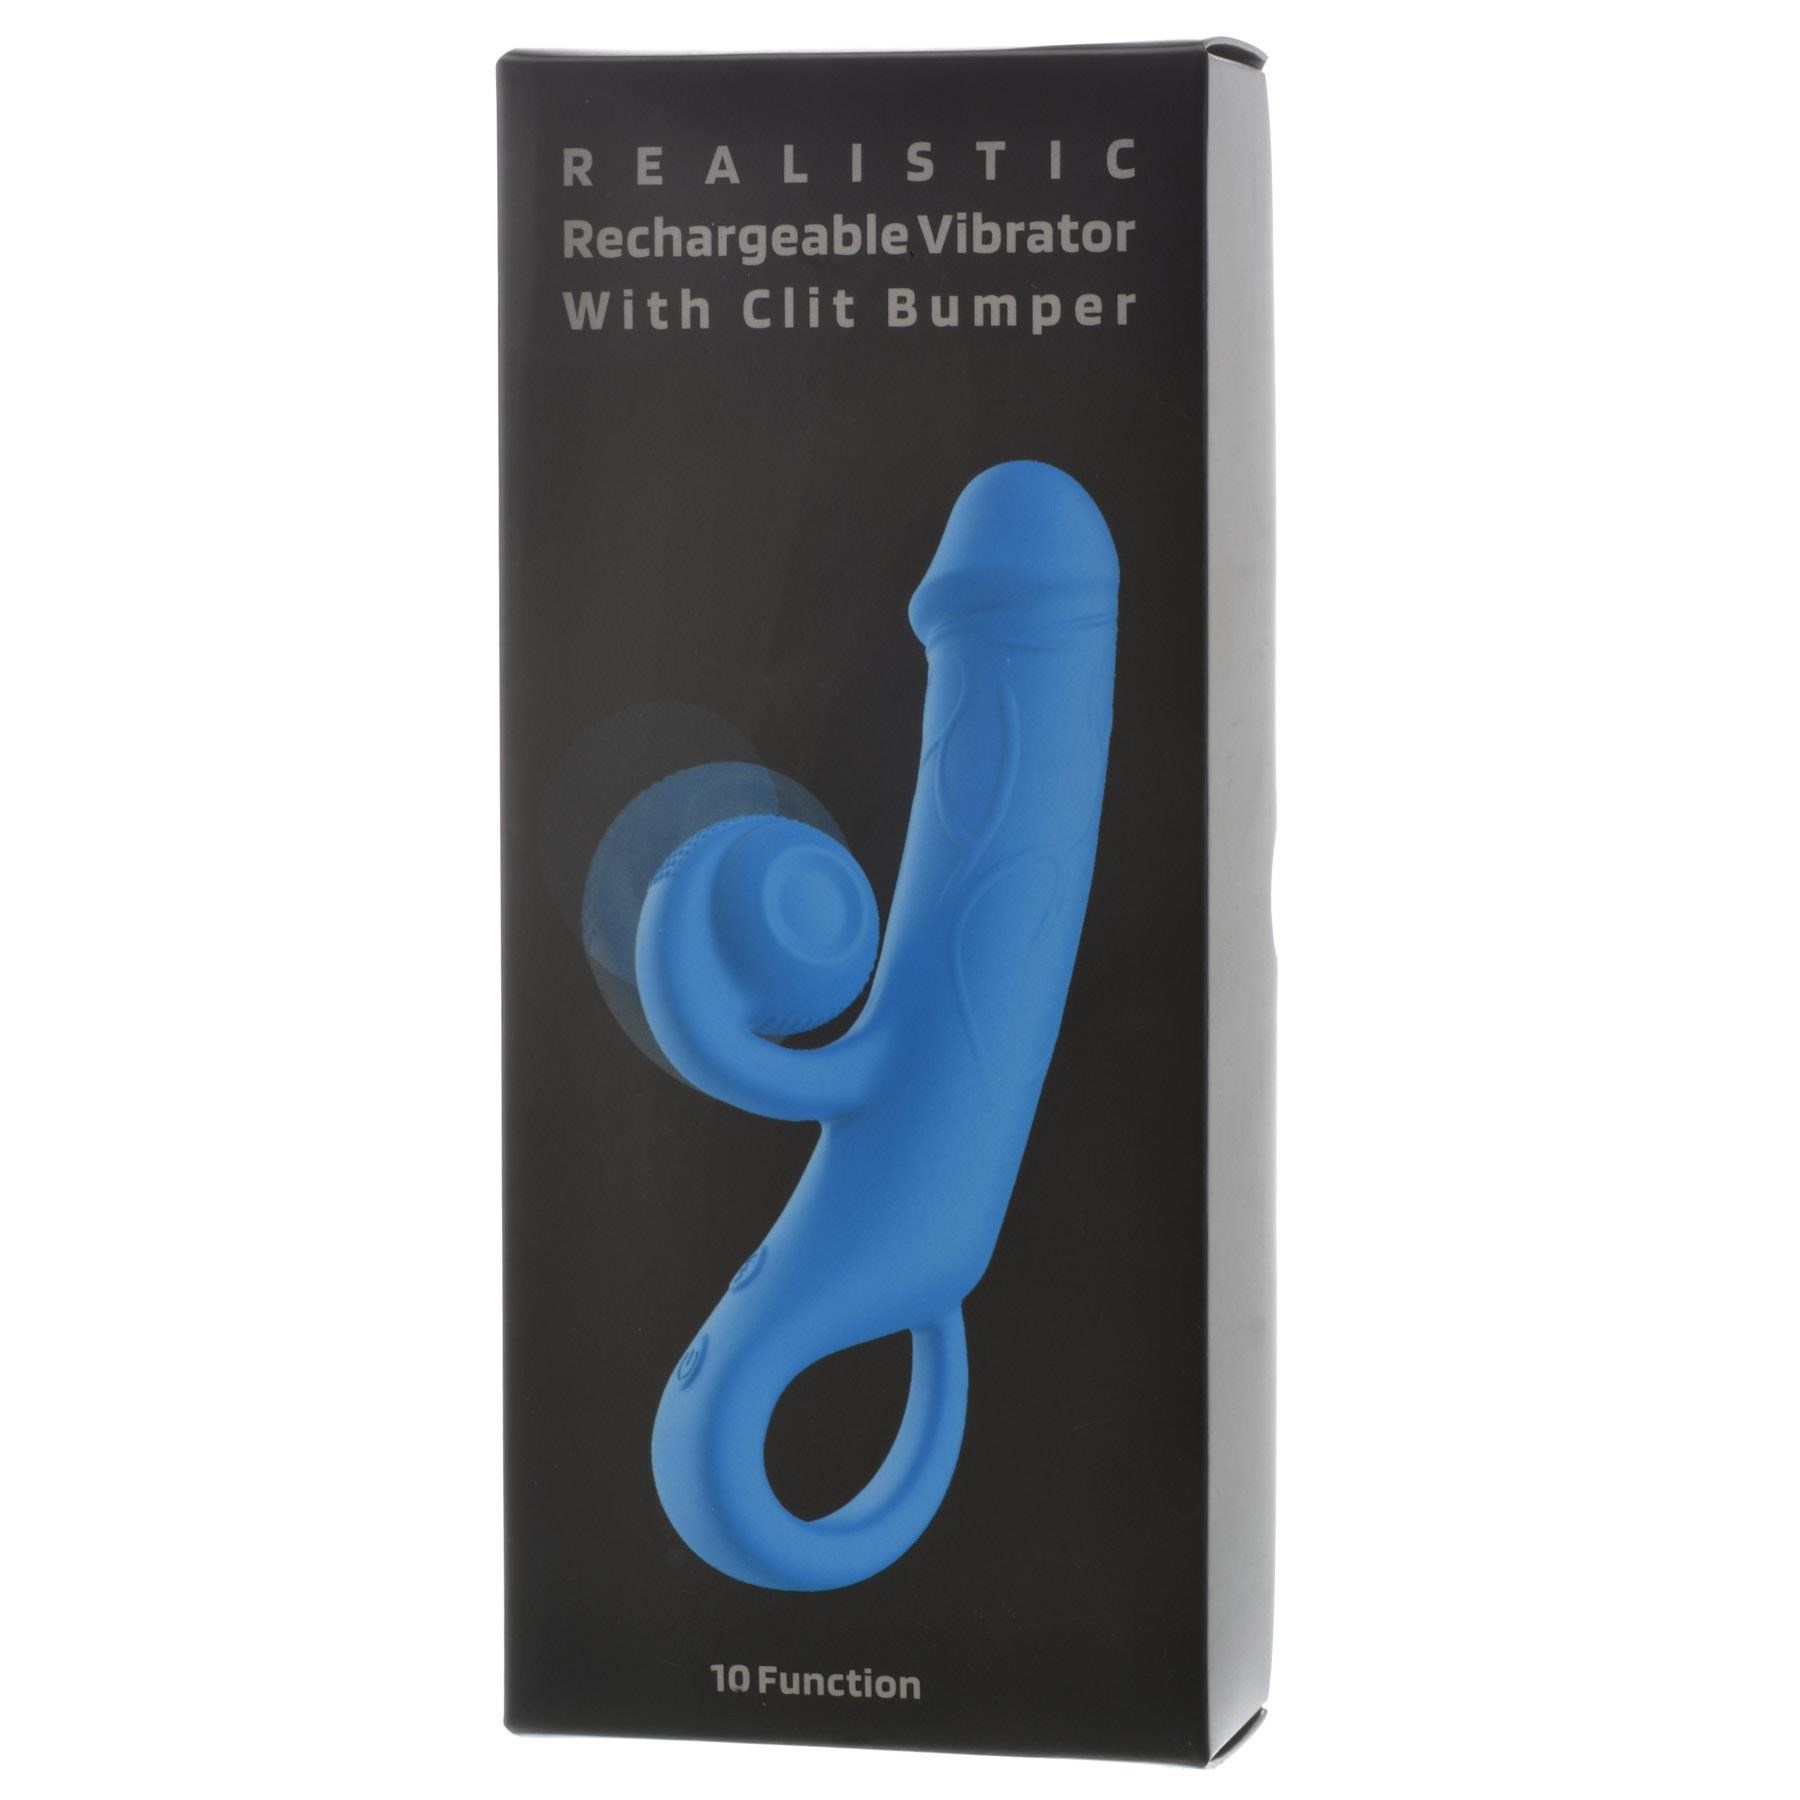 Realistic Rechargeable Vibrator with Clit Bumper- Packaging